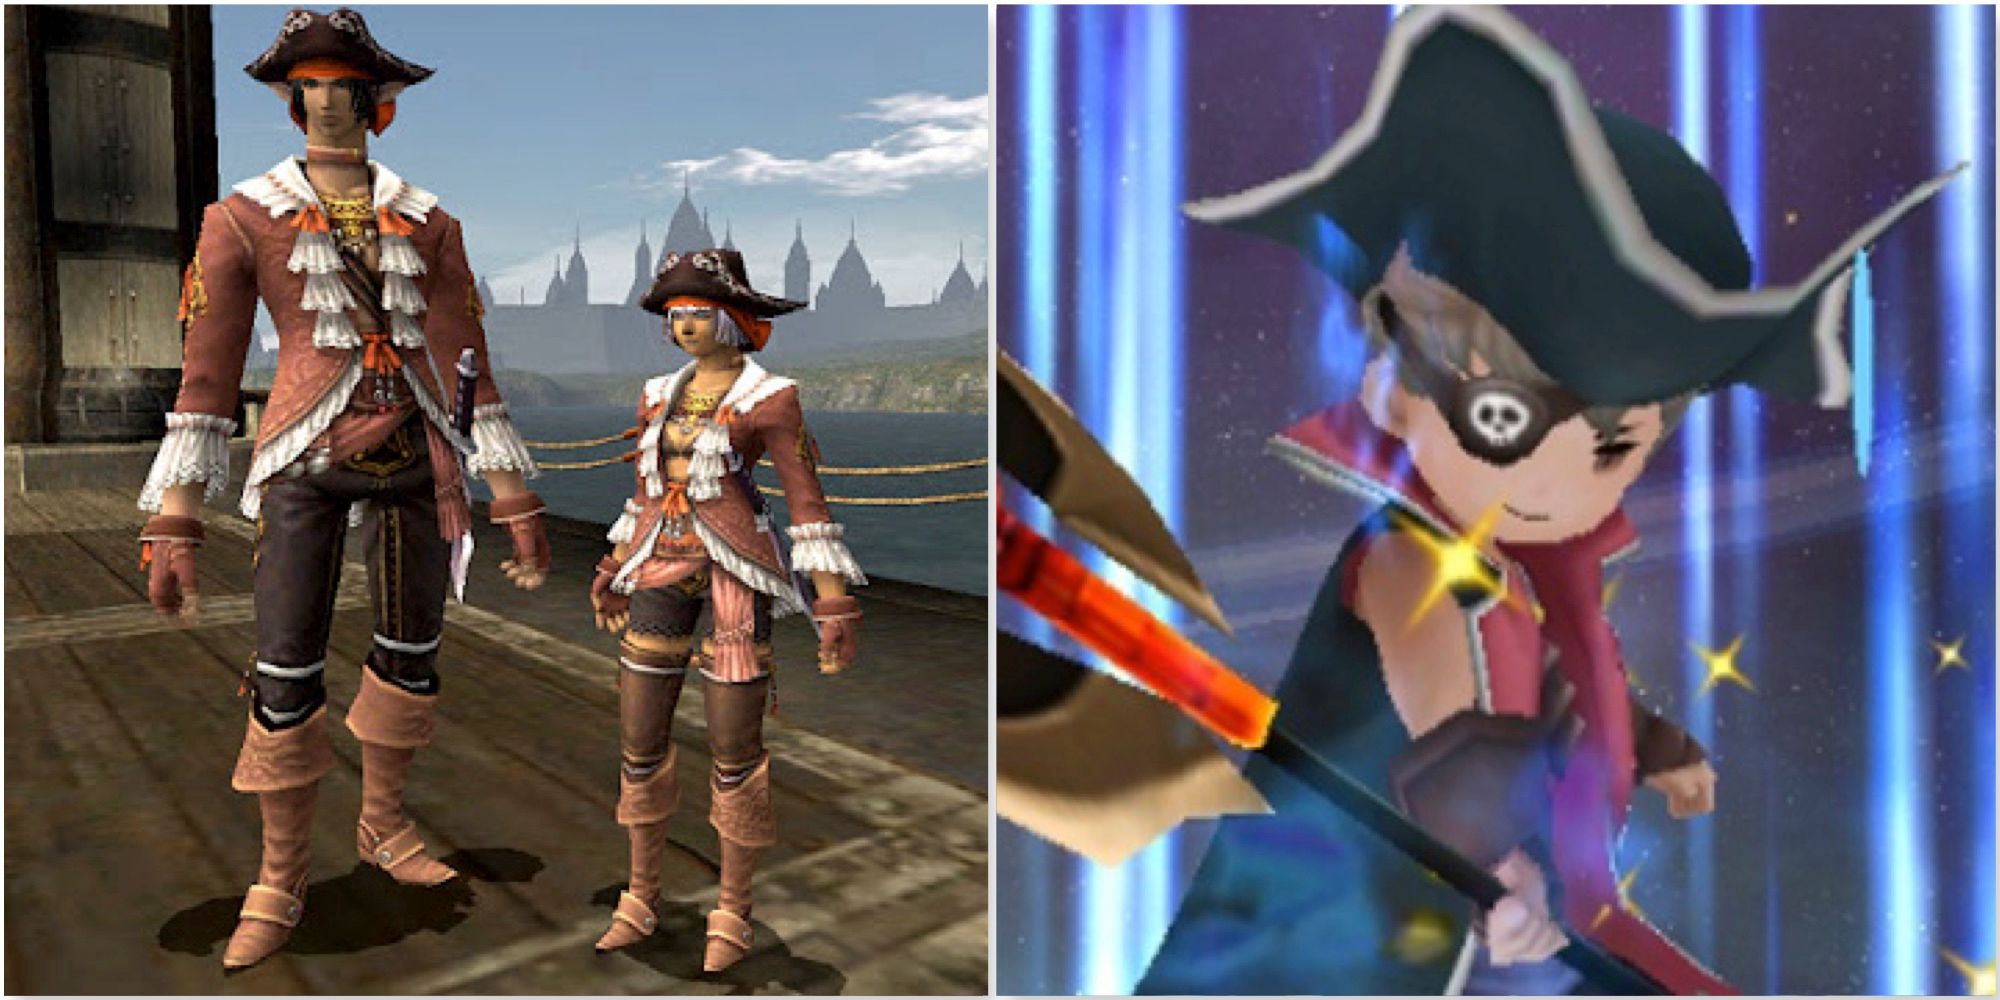 Two Corsair characters in Final Fantasy 11 and Tiz as a Pirate in Bravely Default